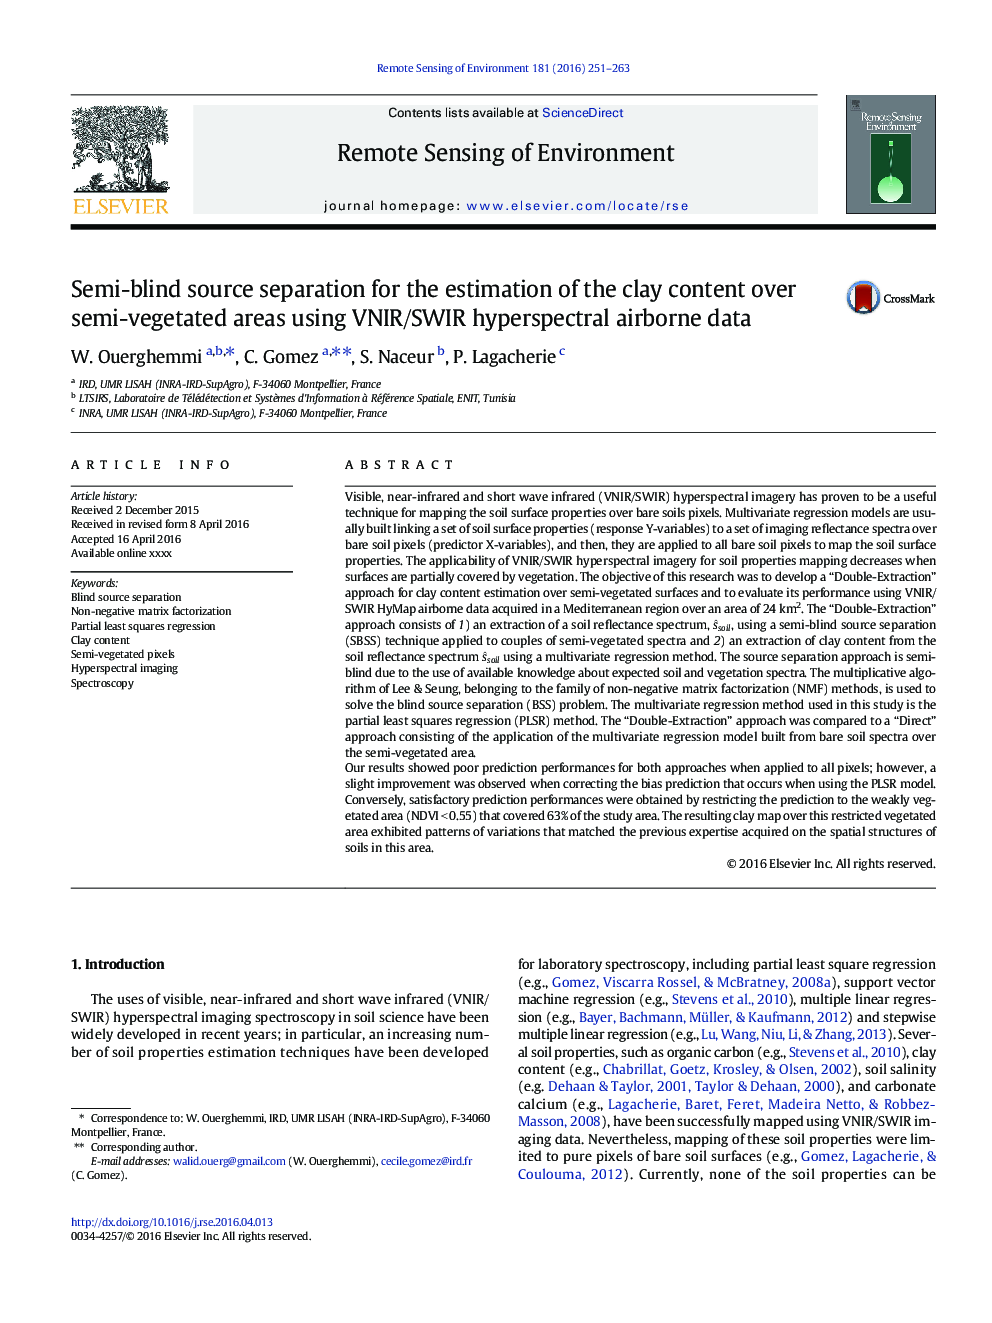 Semi-blind source separation for the estimation of the clay content over semi-vegetated areas using VNIR/SWIR hyperspectral airborne data